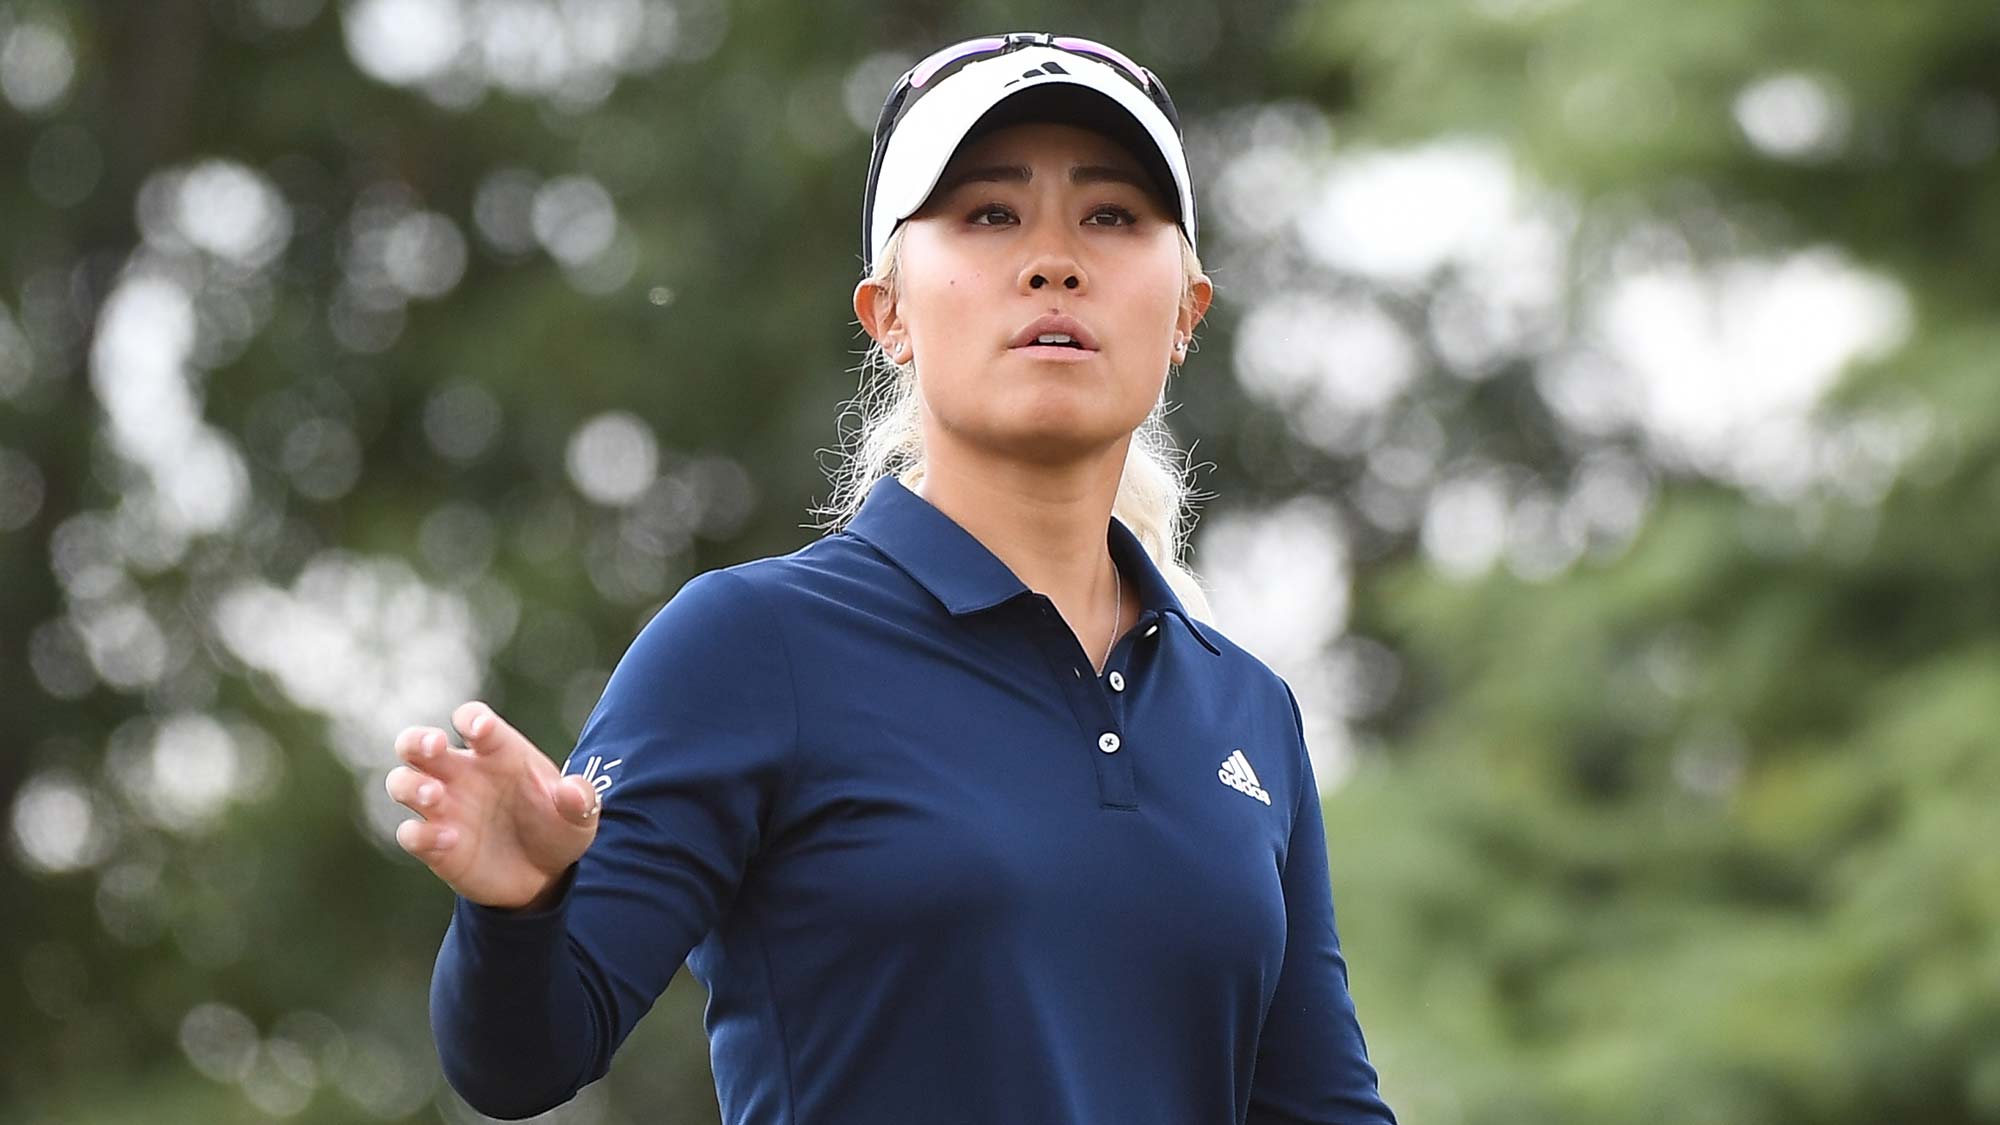 Danielle Kang of the United States plays a shot during the second round of the Buick LPGA Shanghai 